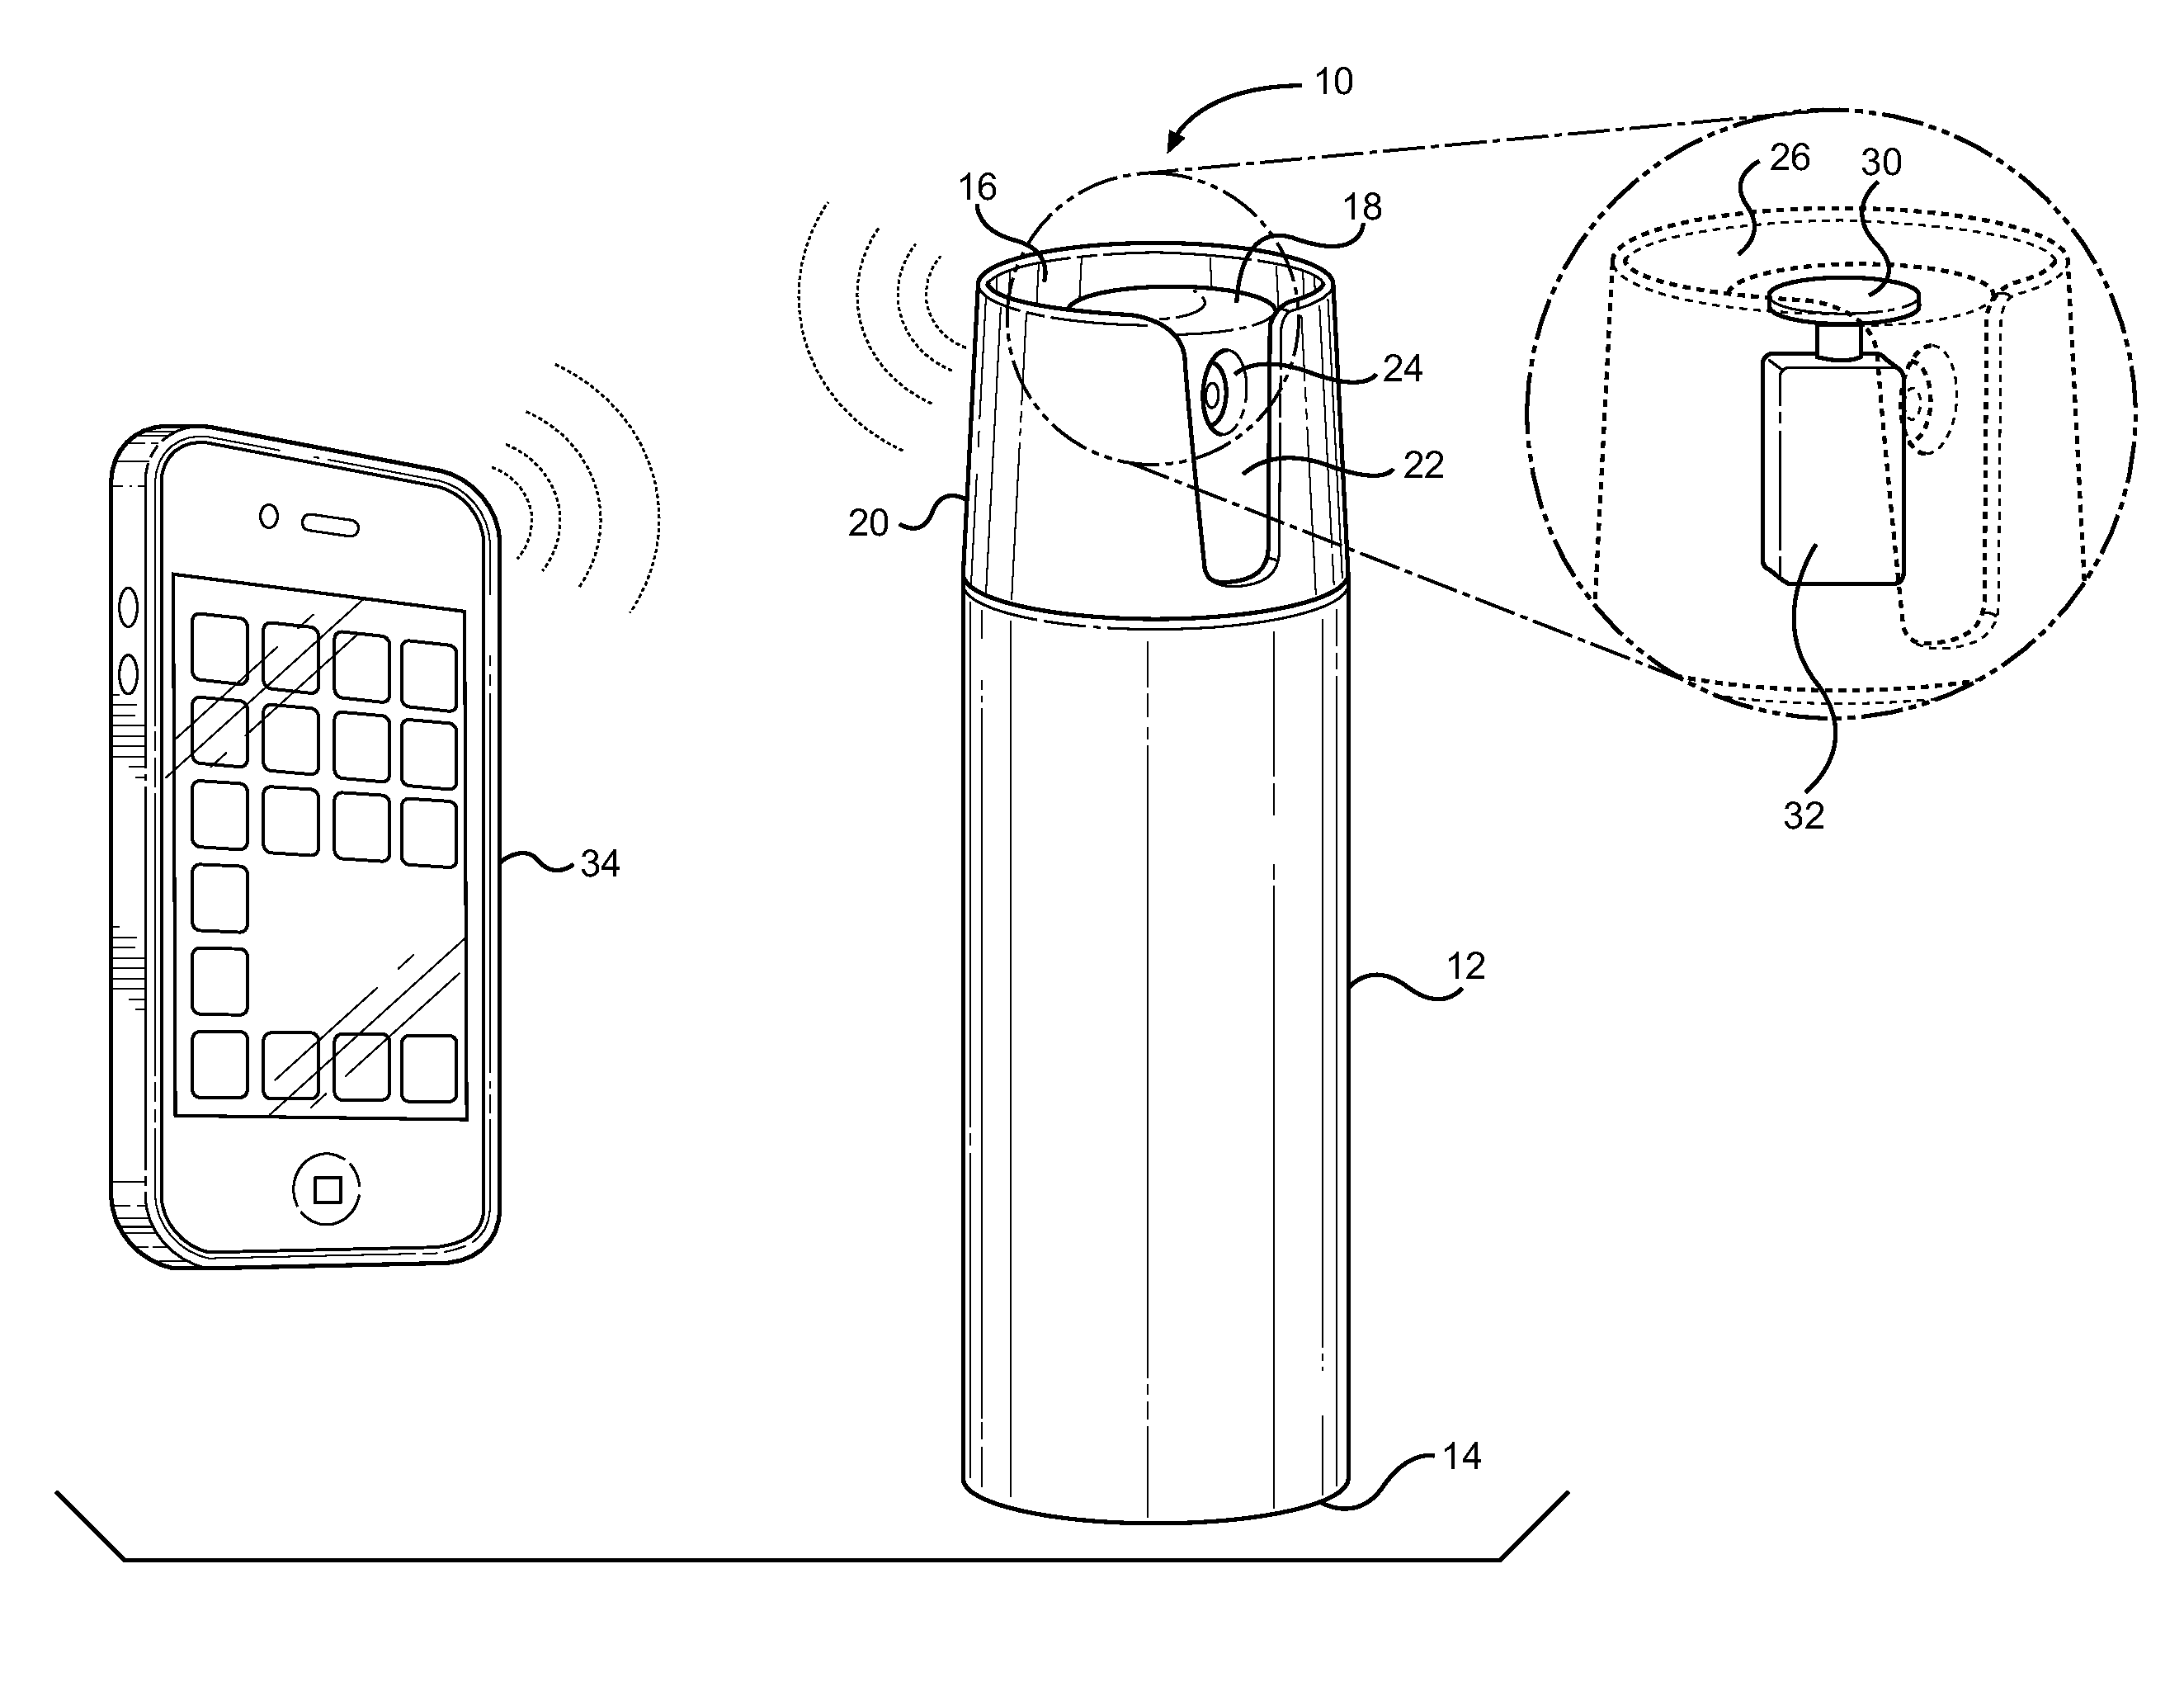 Personal Defense Device with Communication Capabilities